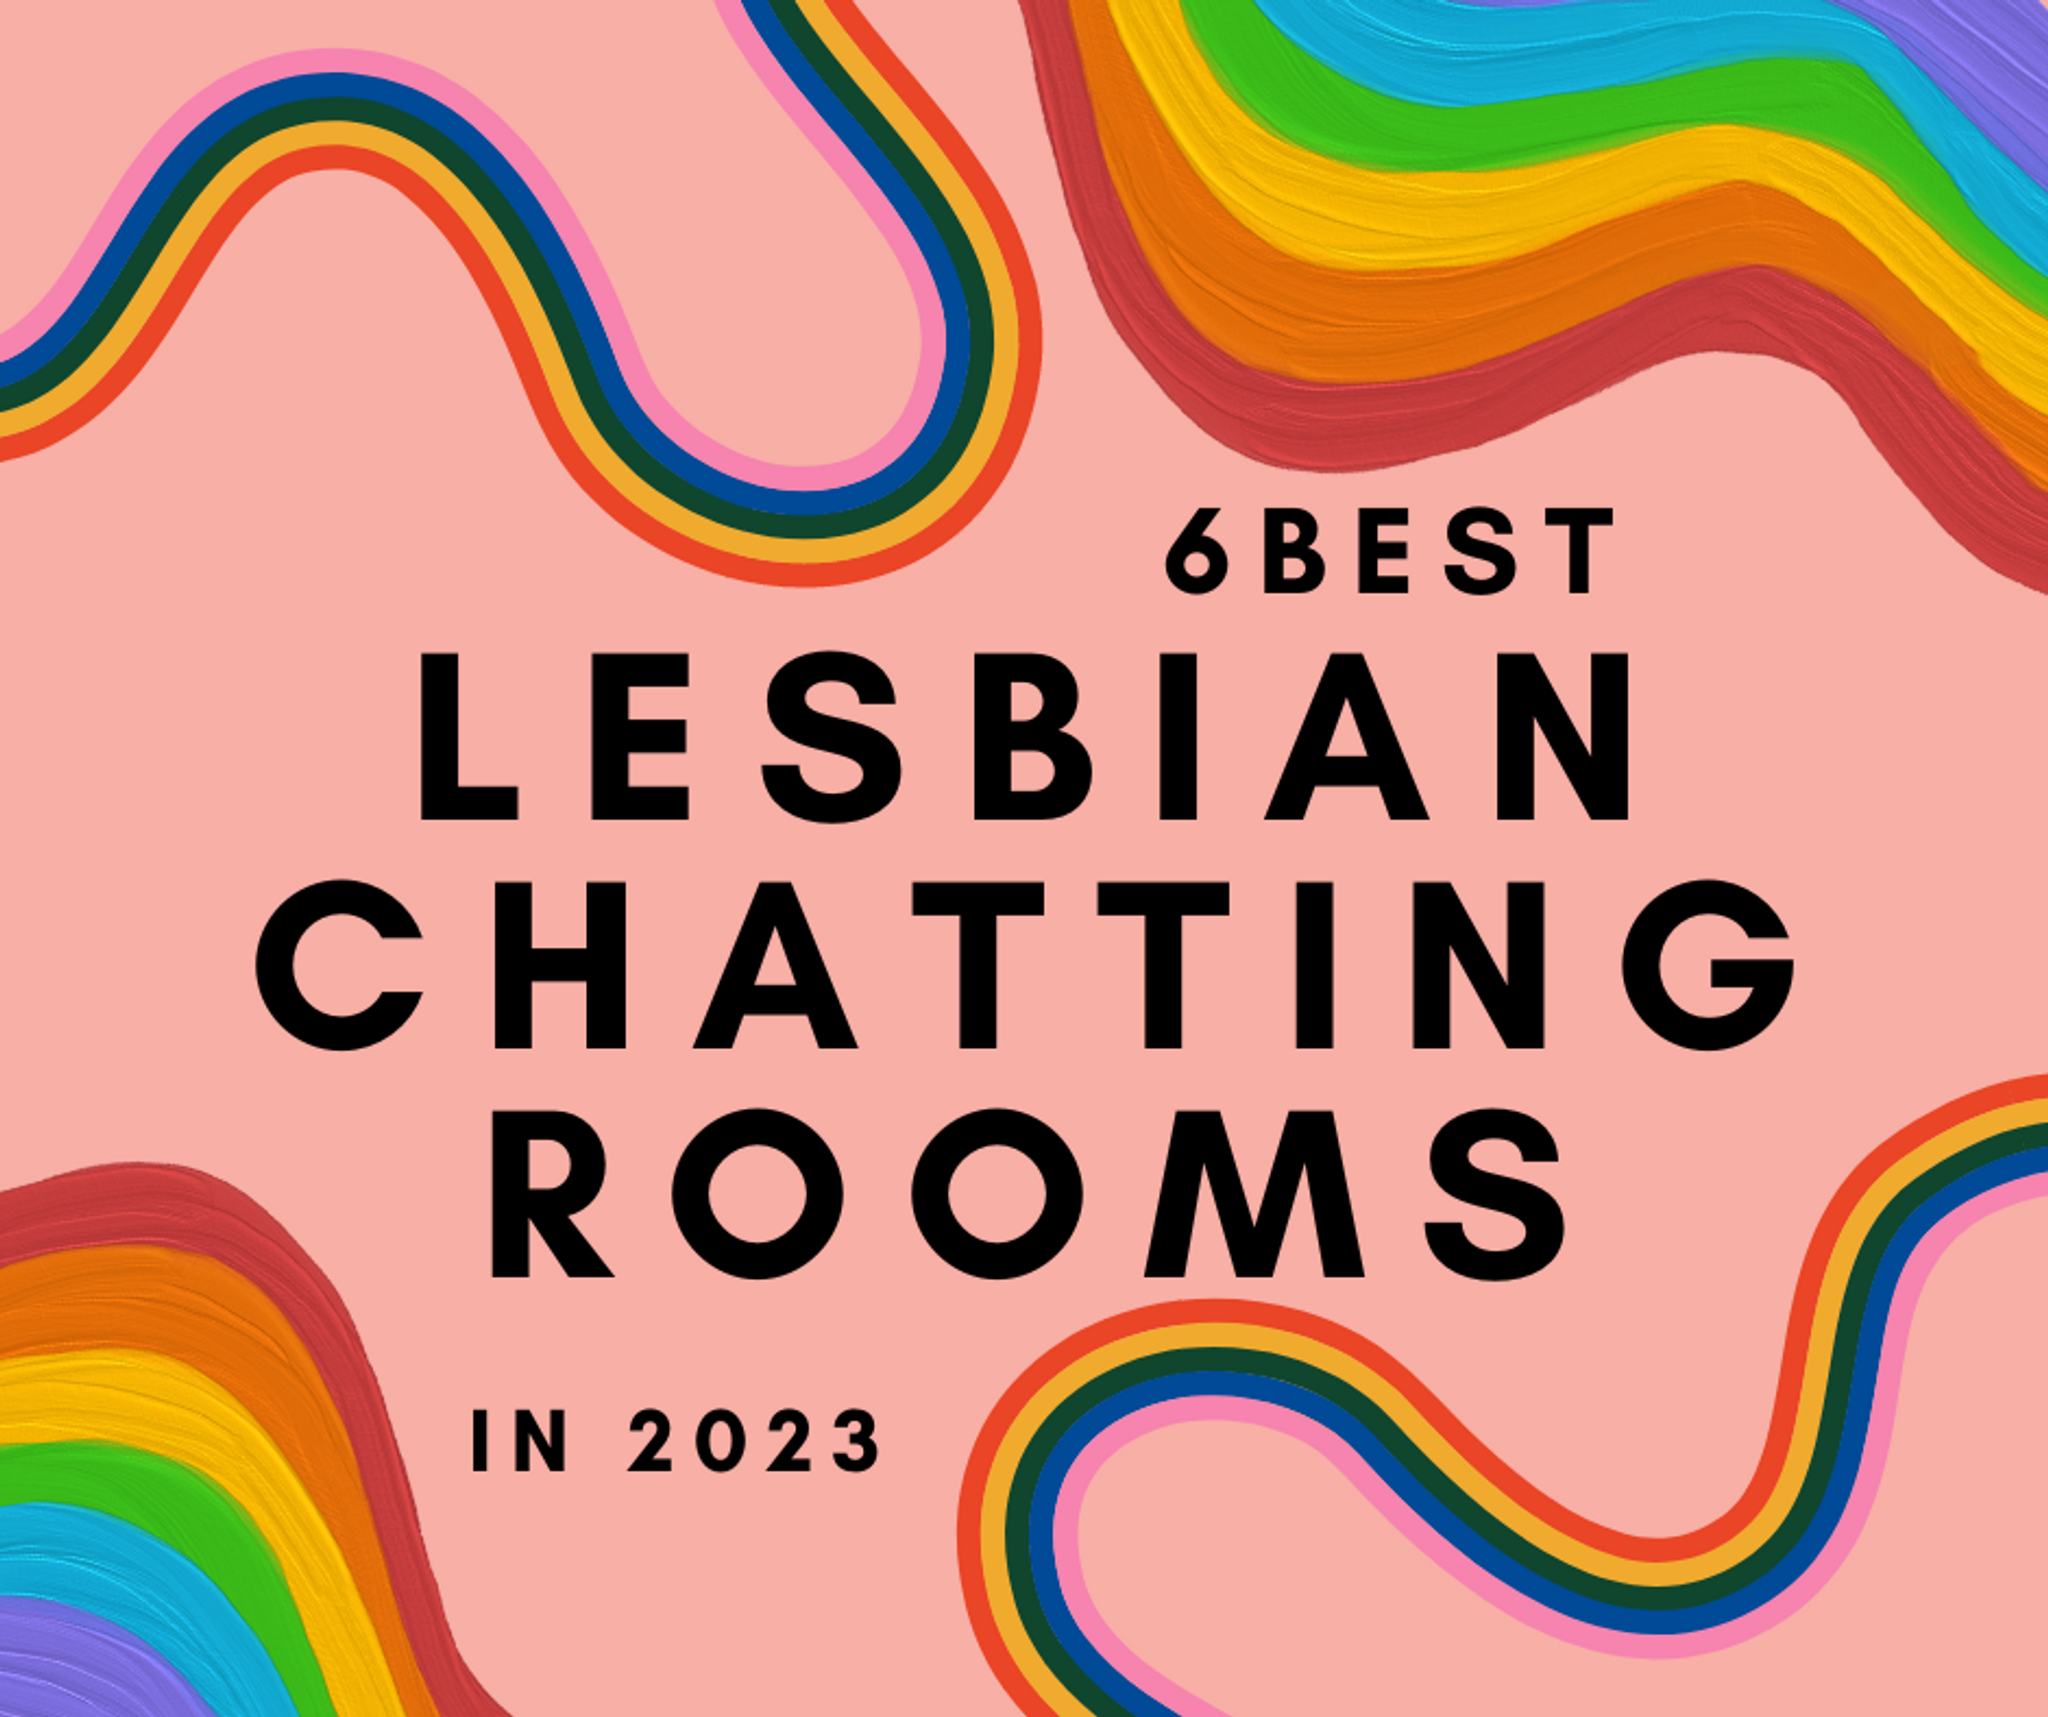 6 Best Lesbian Chatting Rooms In 2023